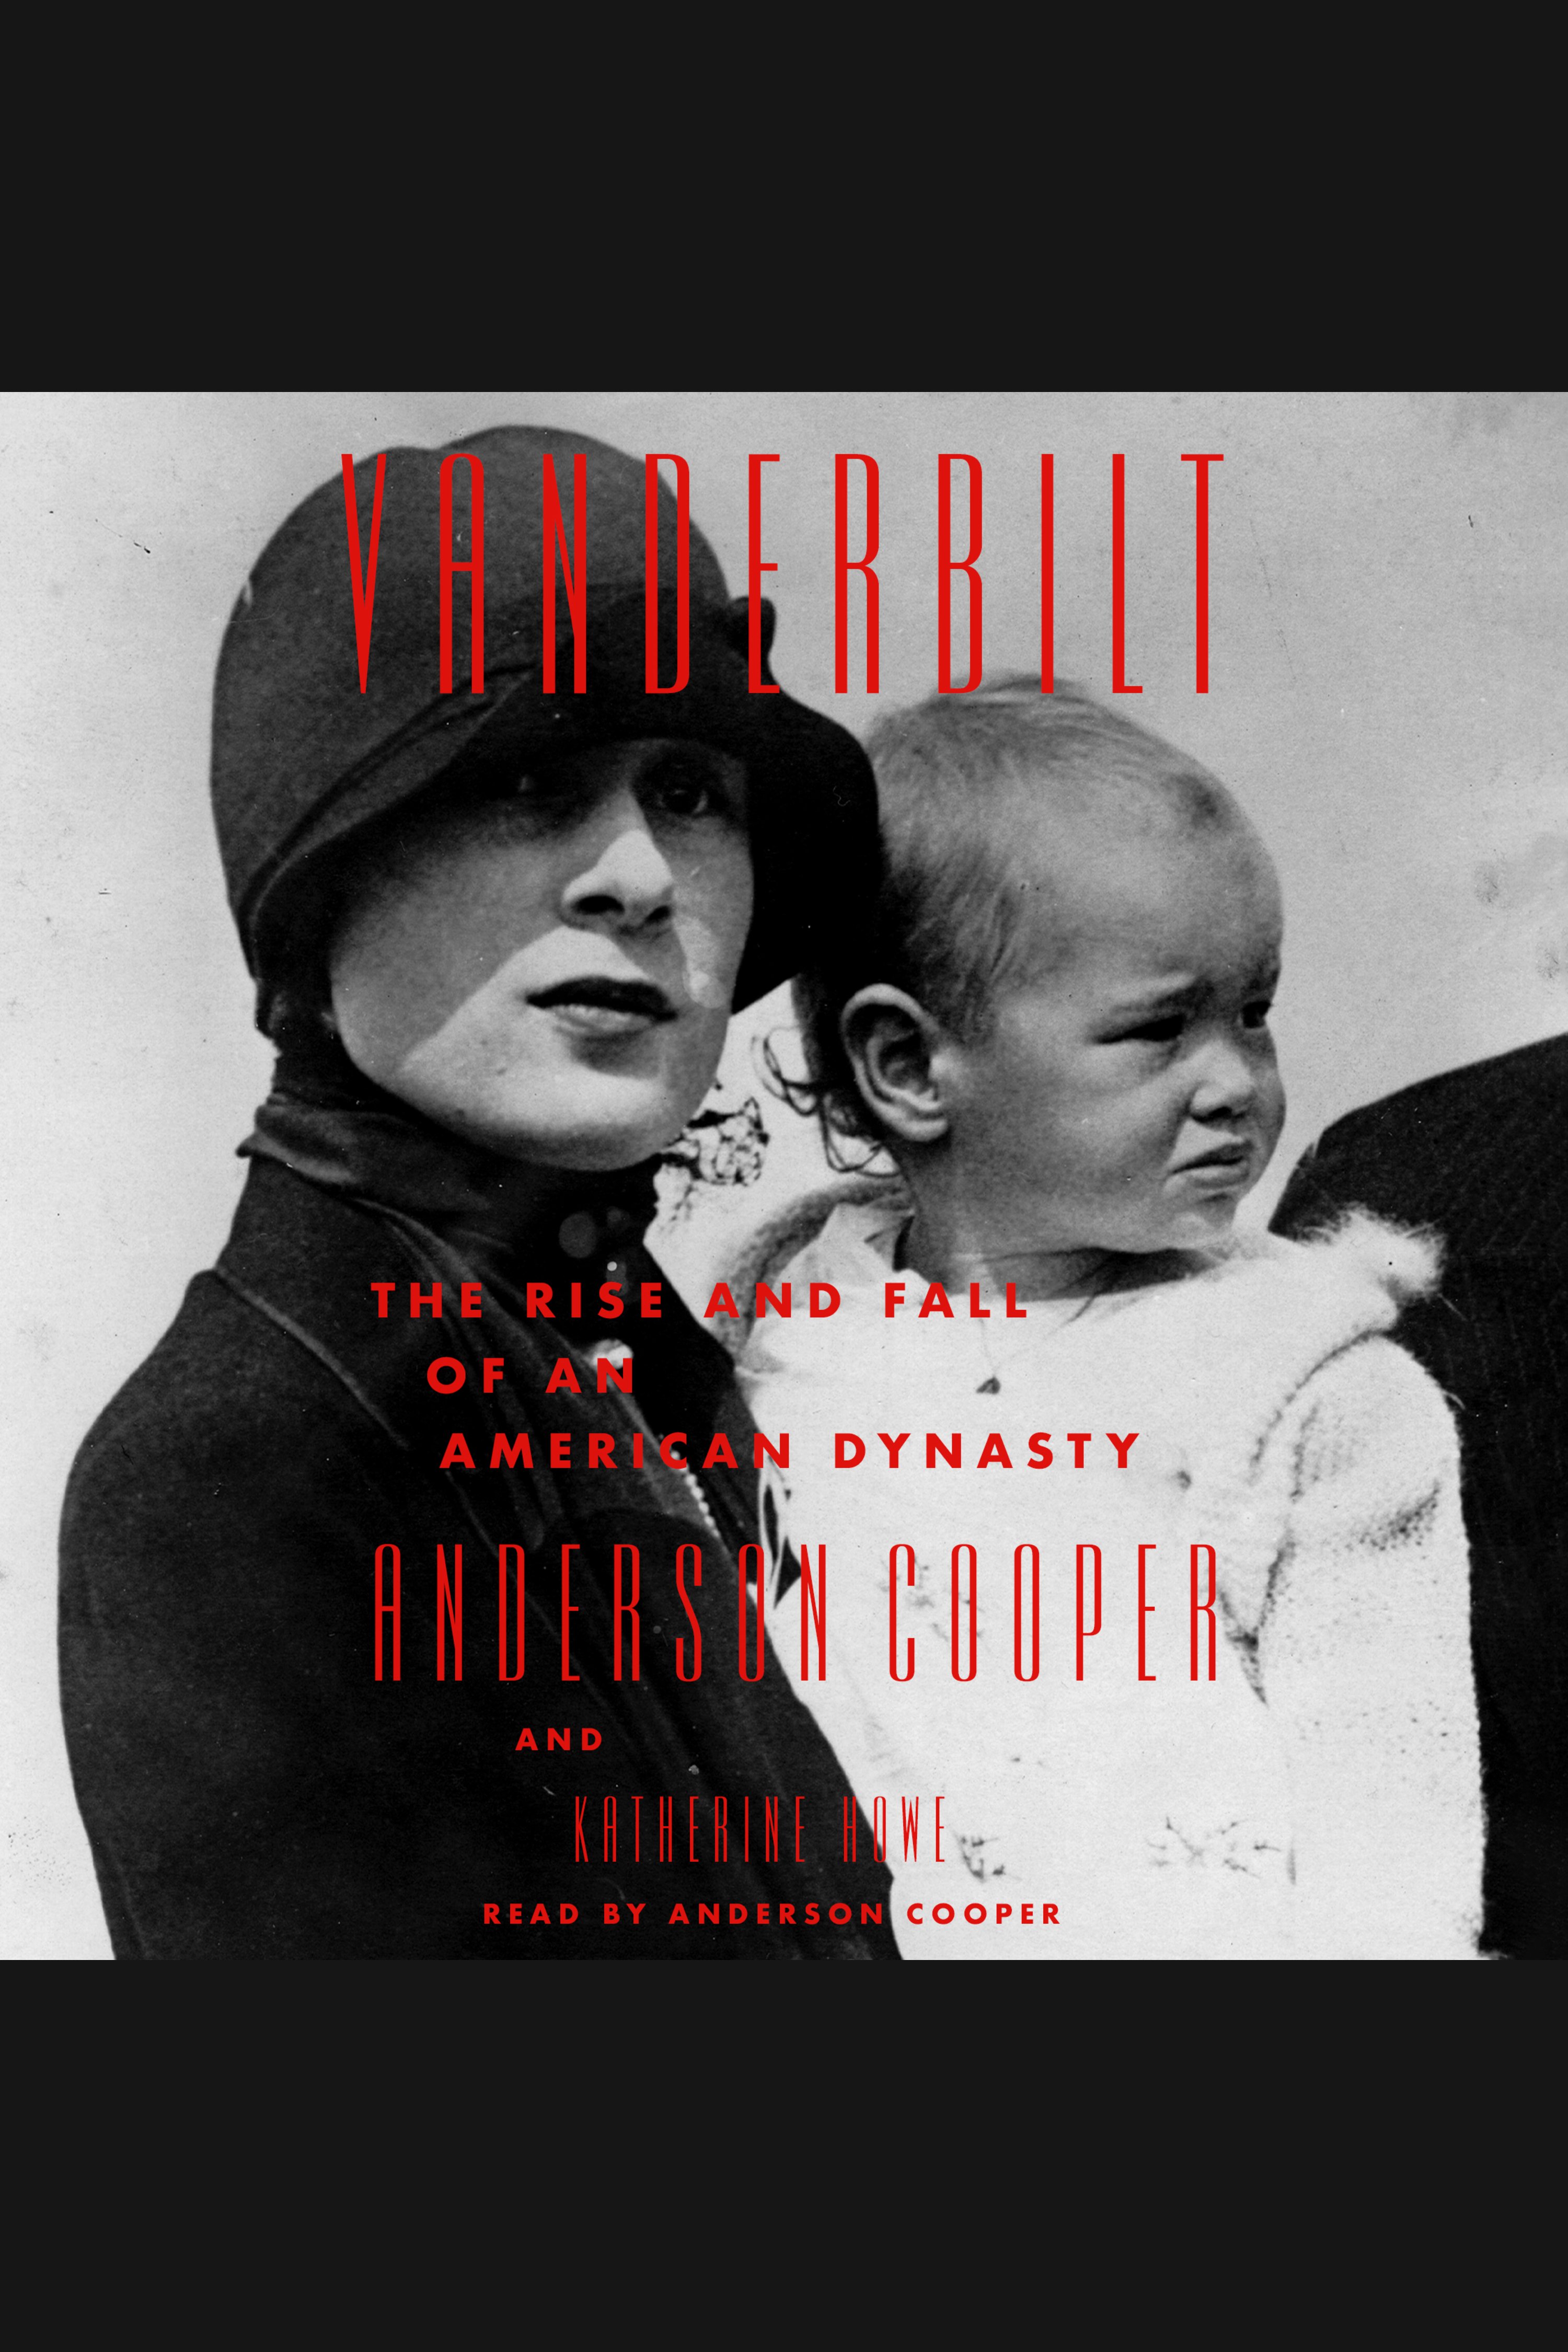 Umschlagbild für Vanderbilt [electronic resource] : The Rise and Fall of an American Dynasty